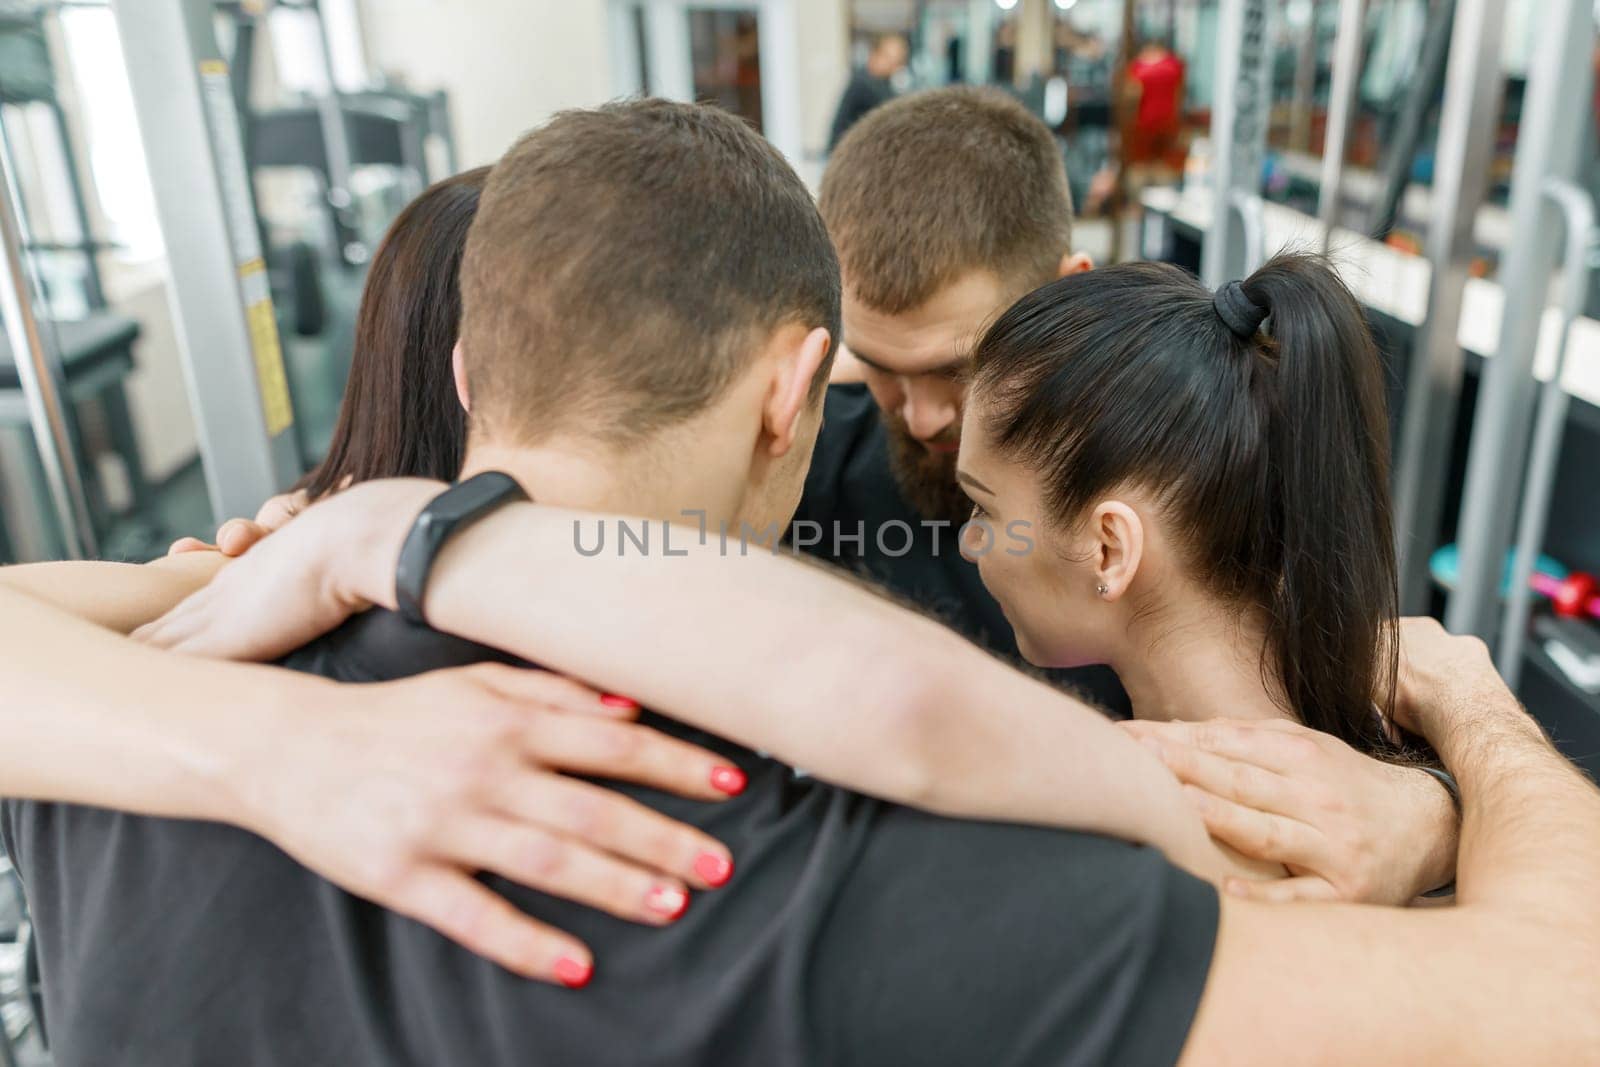 Group of young sports people embracing together in fitness gym backs. Fitness, sport, teamwork, motivation, people, healthy lifestyle concept.